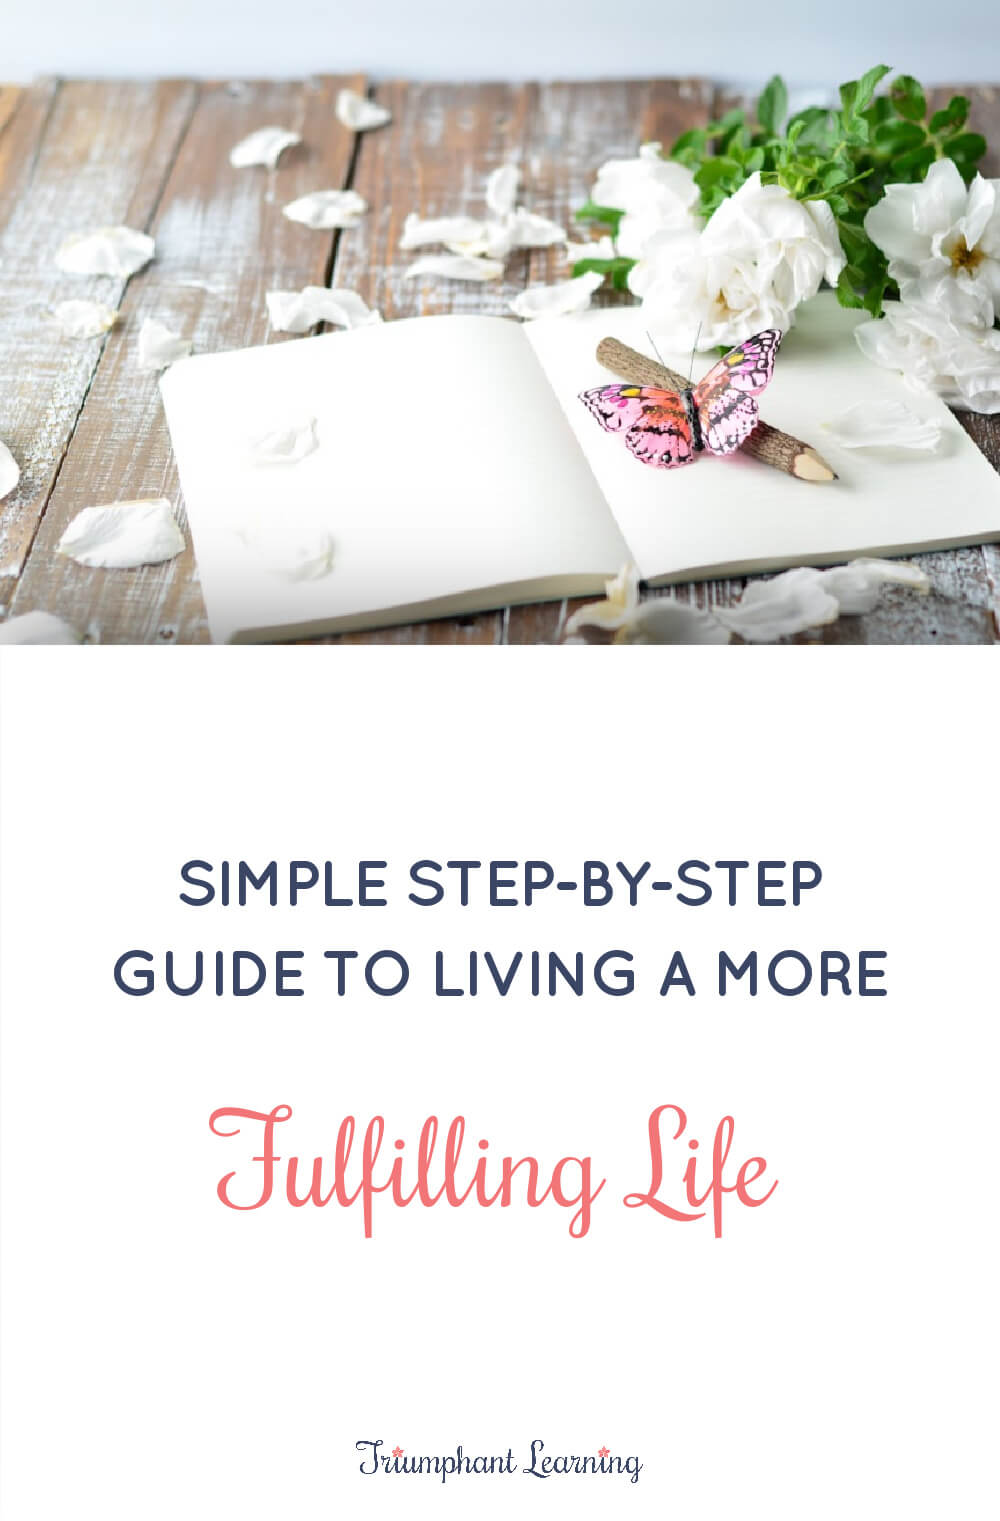 Learn a simple, step-by-step guide to help you identify what to change and create an action plan to live a more fulfilling life. via @TriLearning